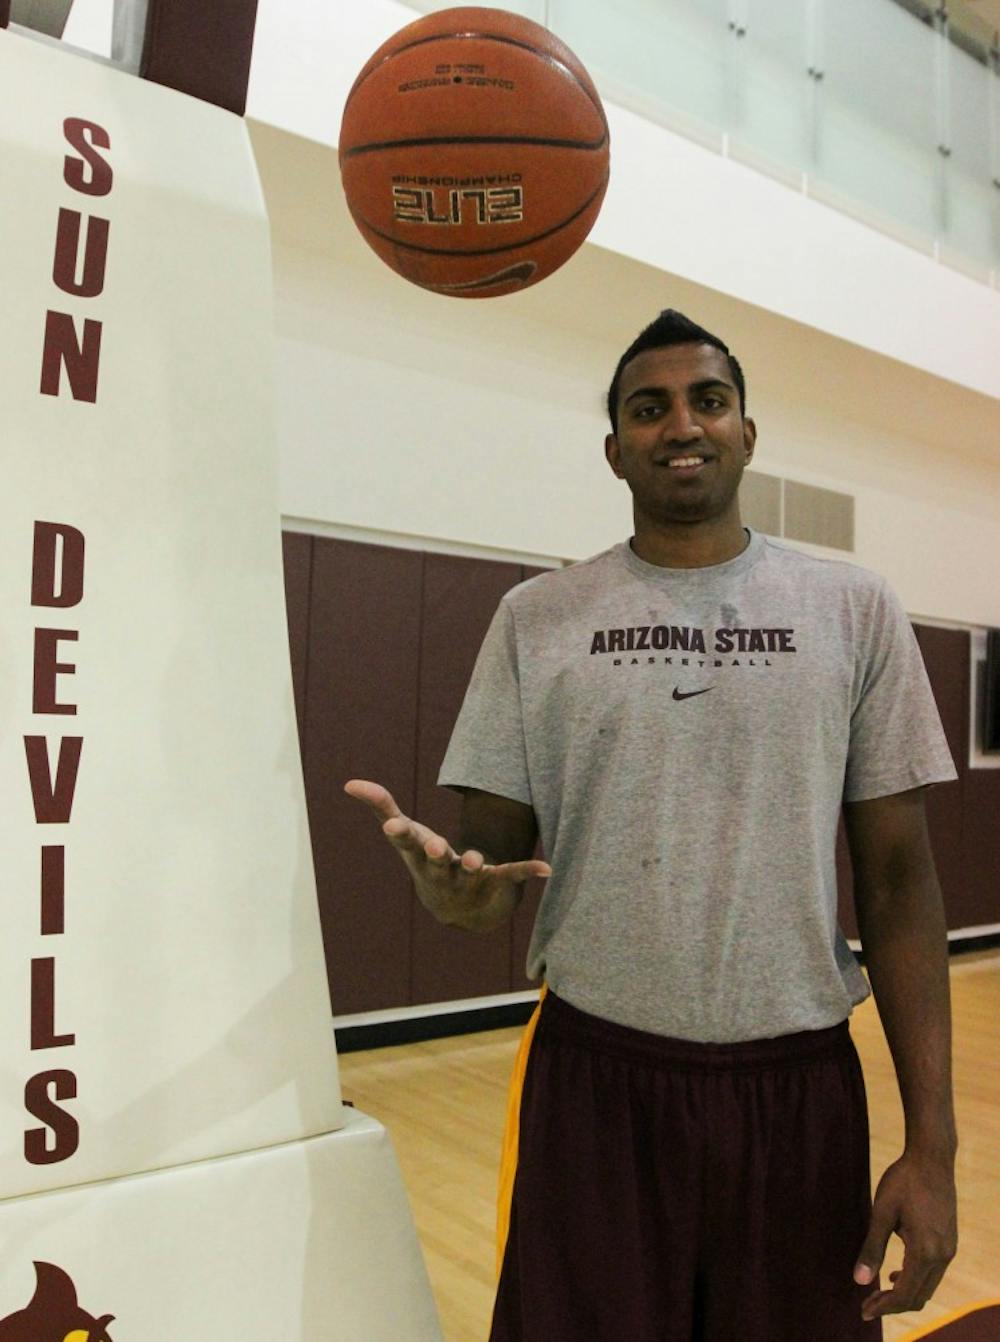 Sai Tummala, ASU's newest basketball recruit, tosses a basketball up in the air during a workout at the Tempe campus training facility. Tummala plans on studying medicine while playing for the team next semester. (Photo by Dominic Valente)